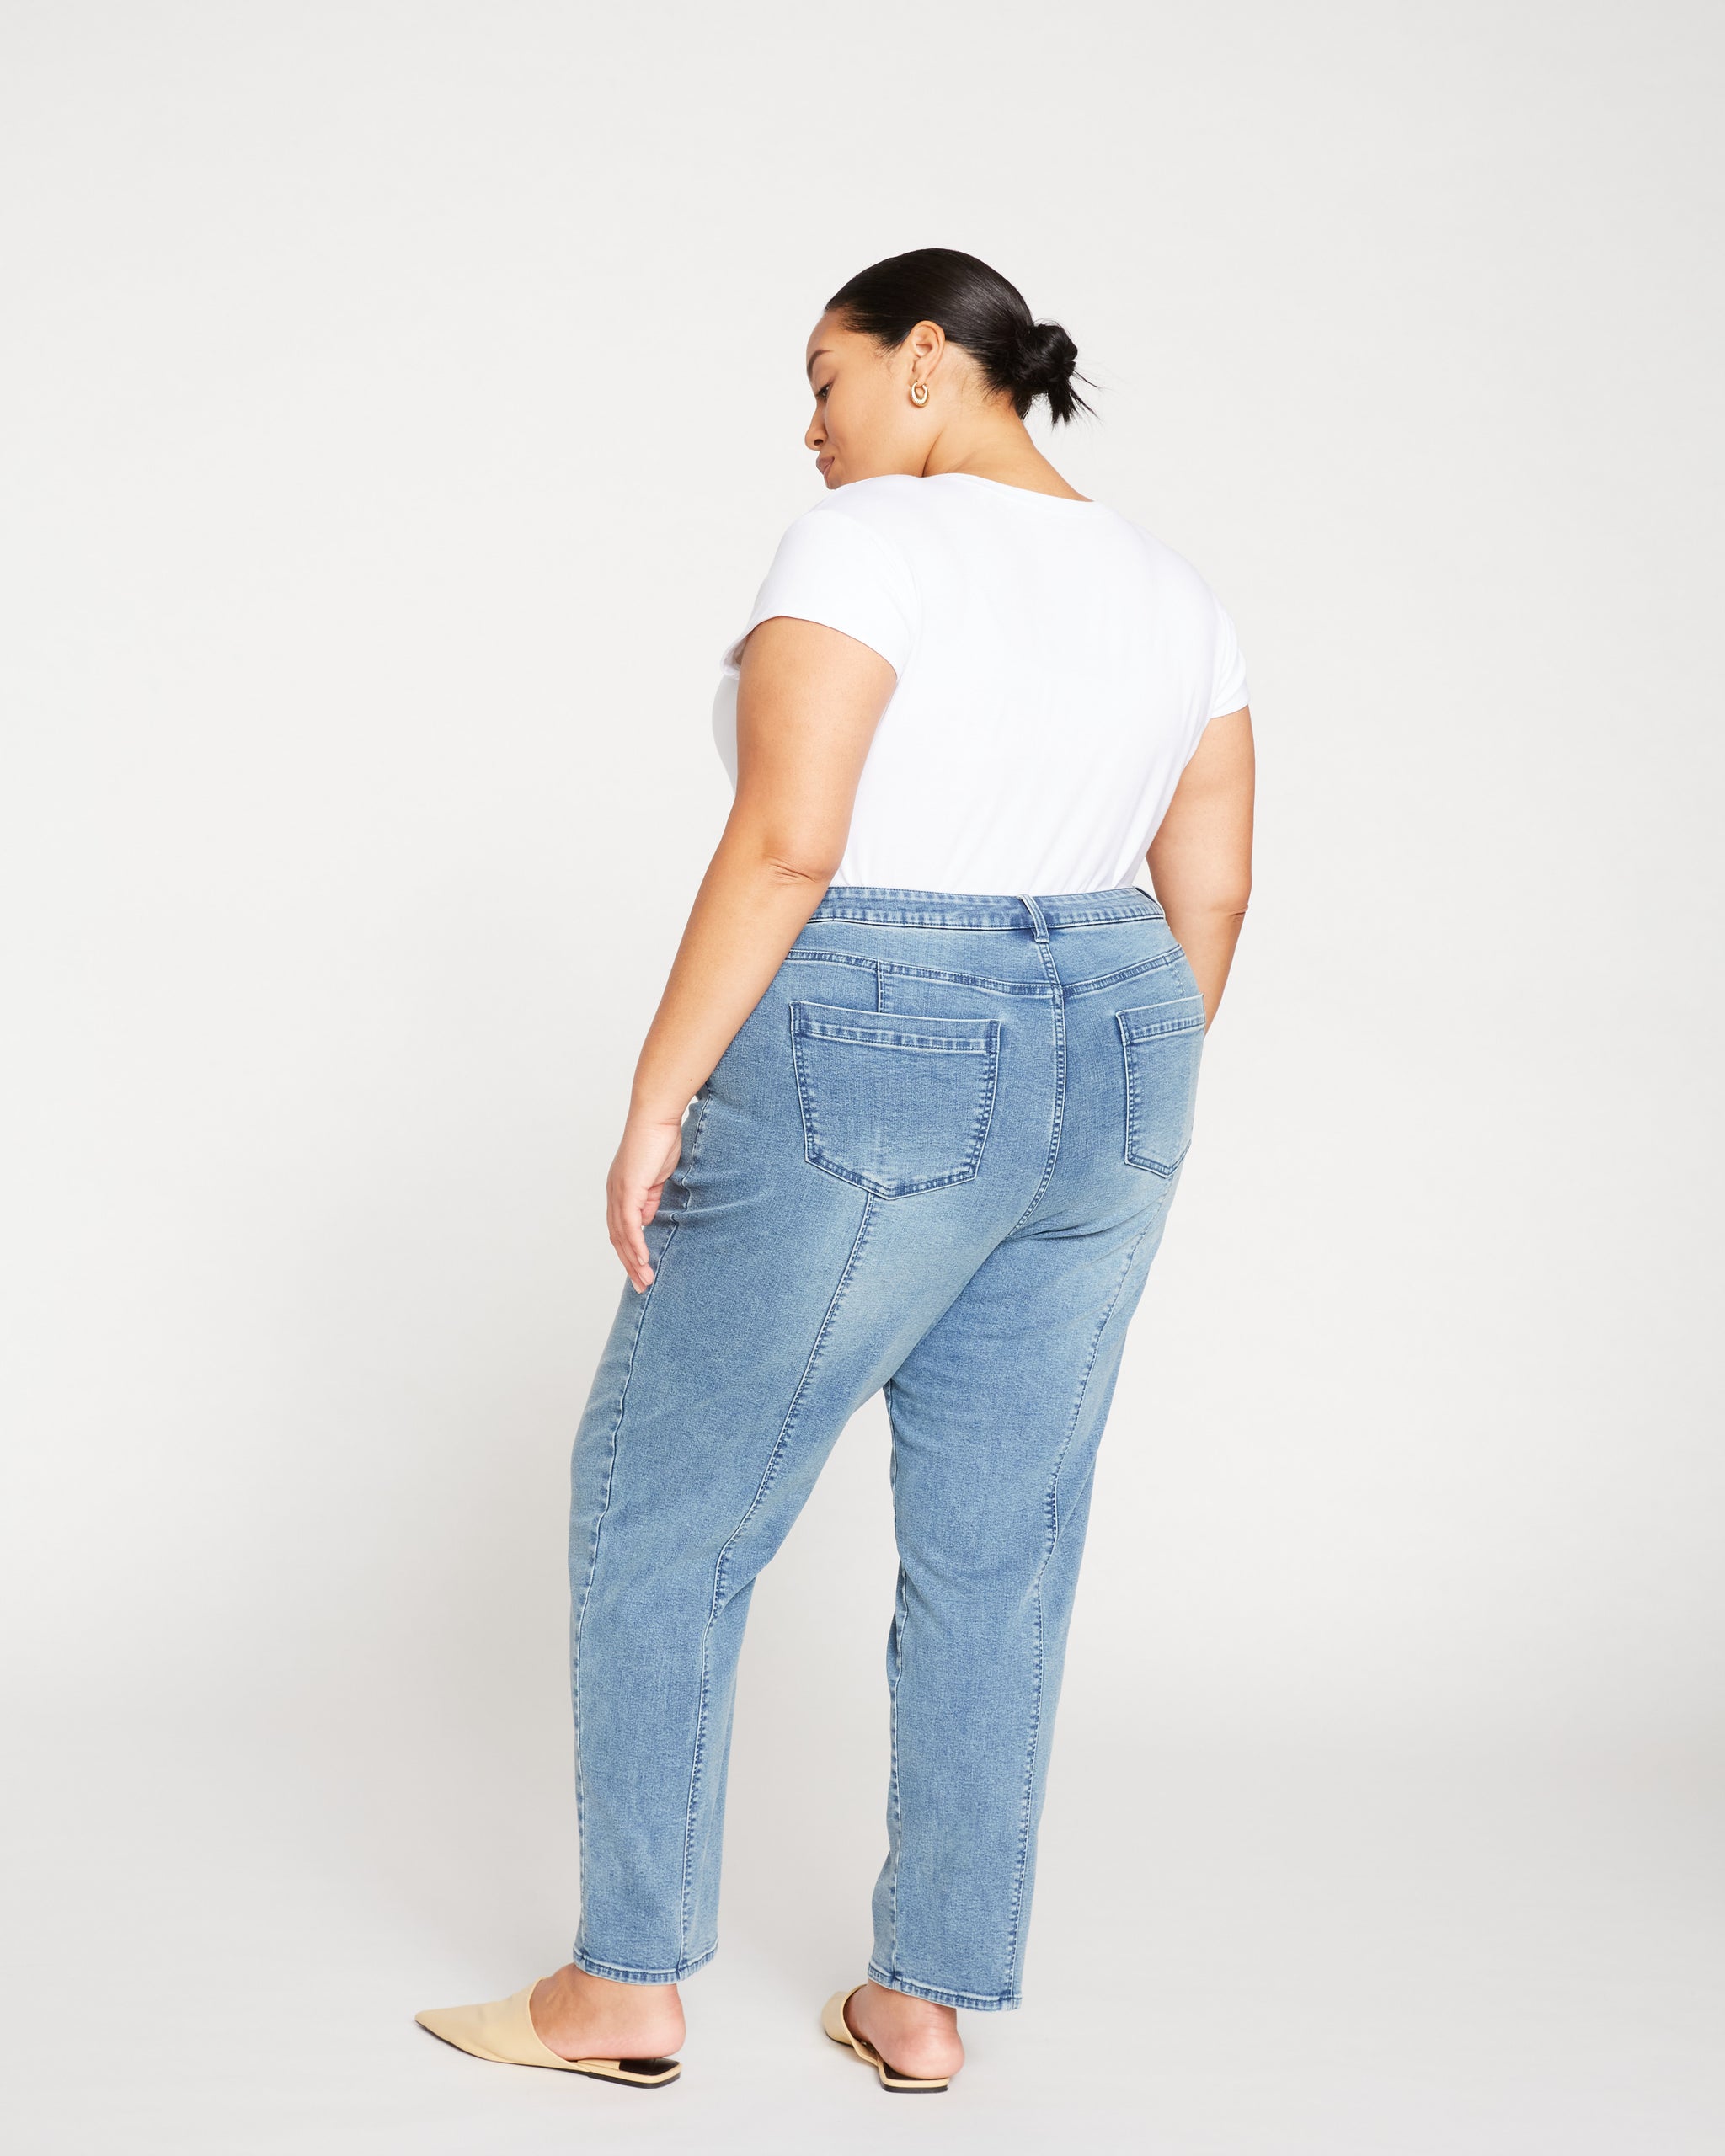 Whitney Super High Rise Seam Tapered Leg Jeans - Distressed Light